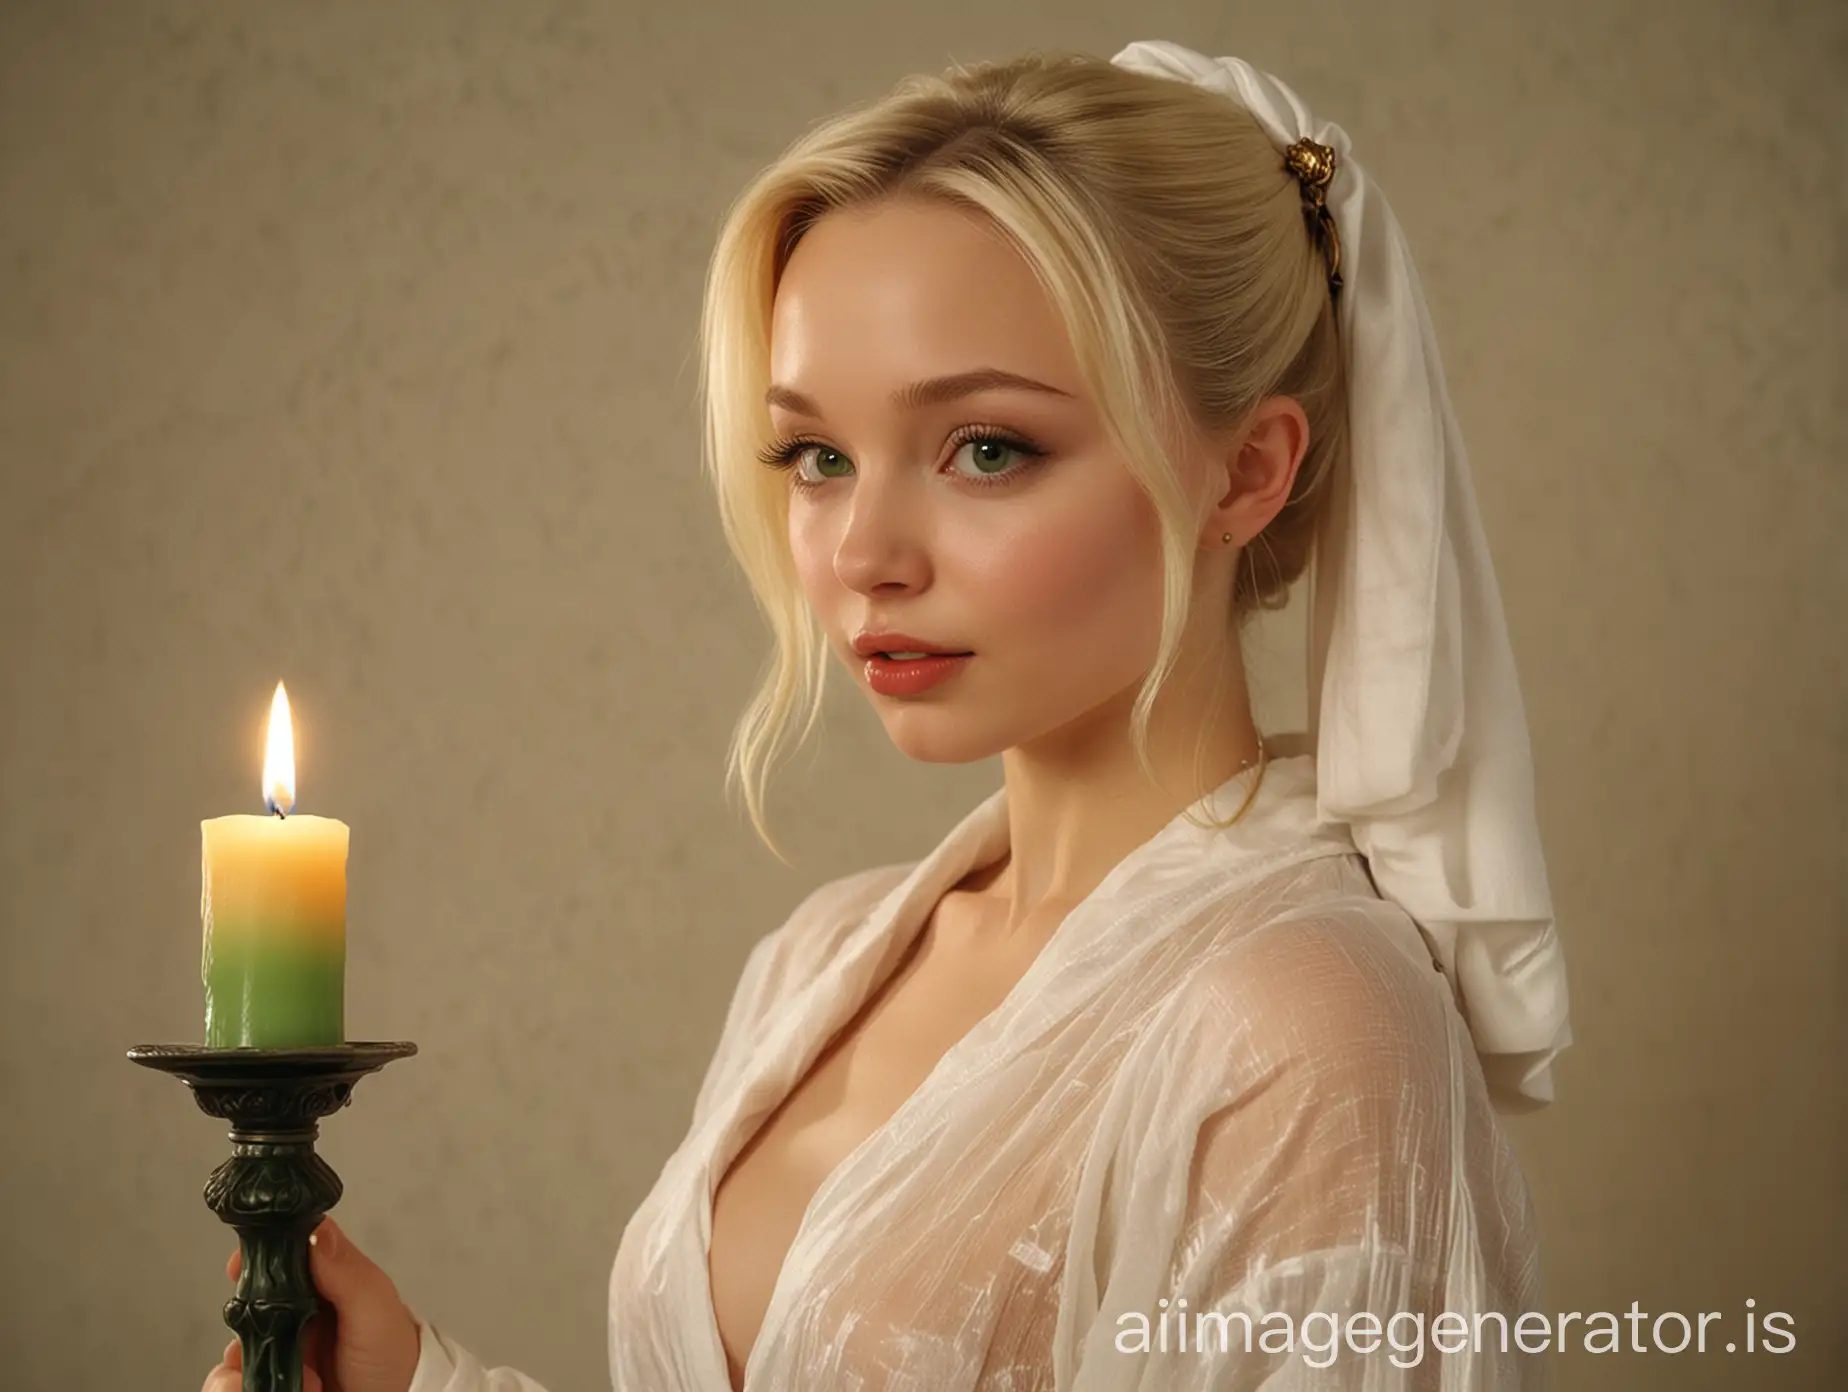 Sensual-Blond-Woman-in-1980s-Style-Sheer-Robe-Holding-Candlestick